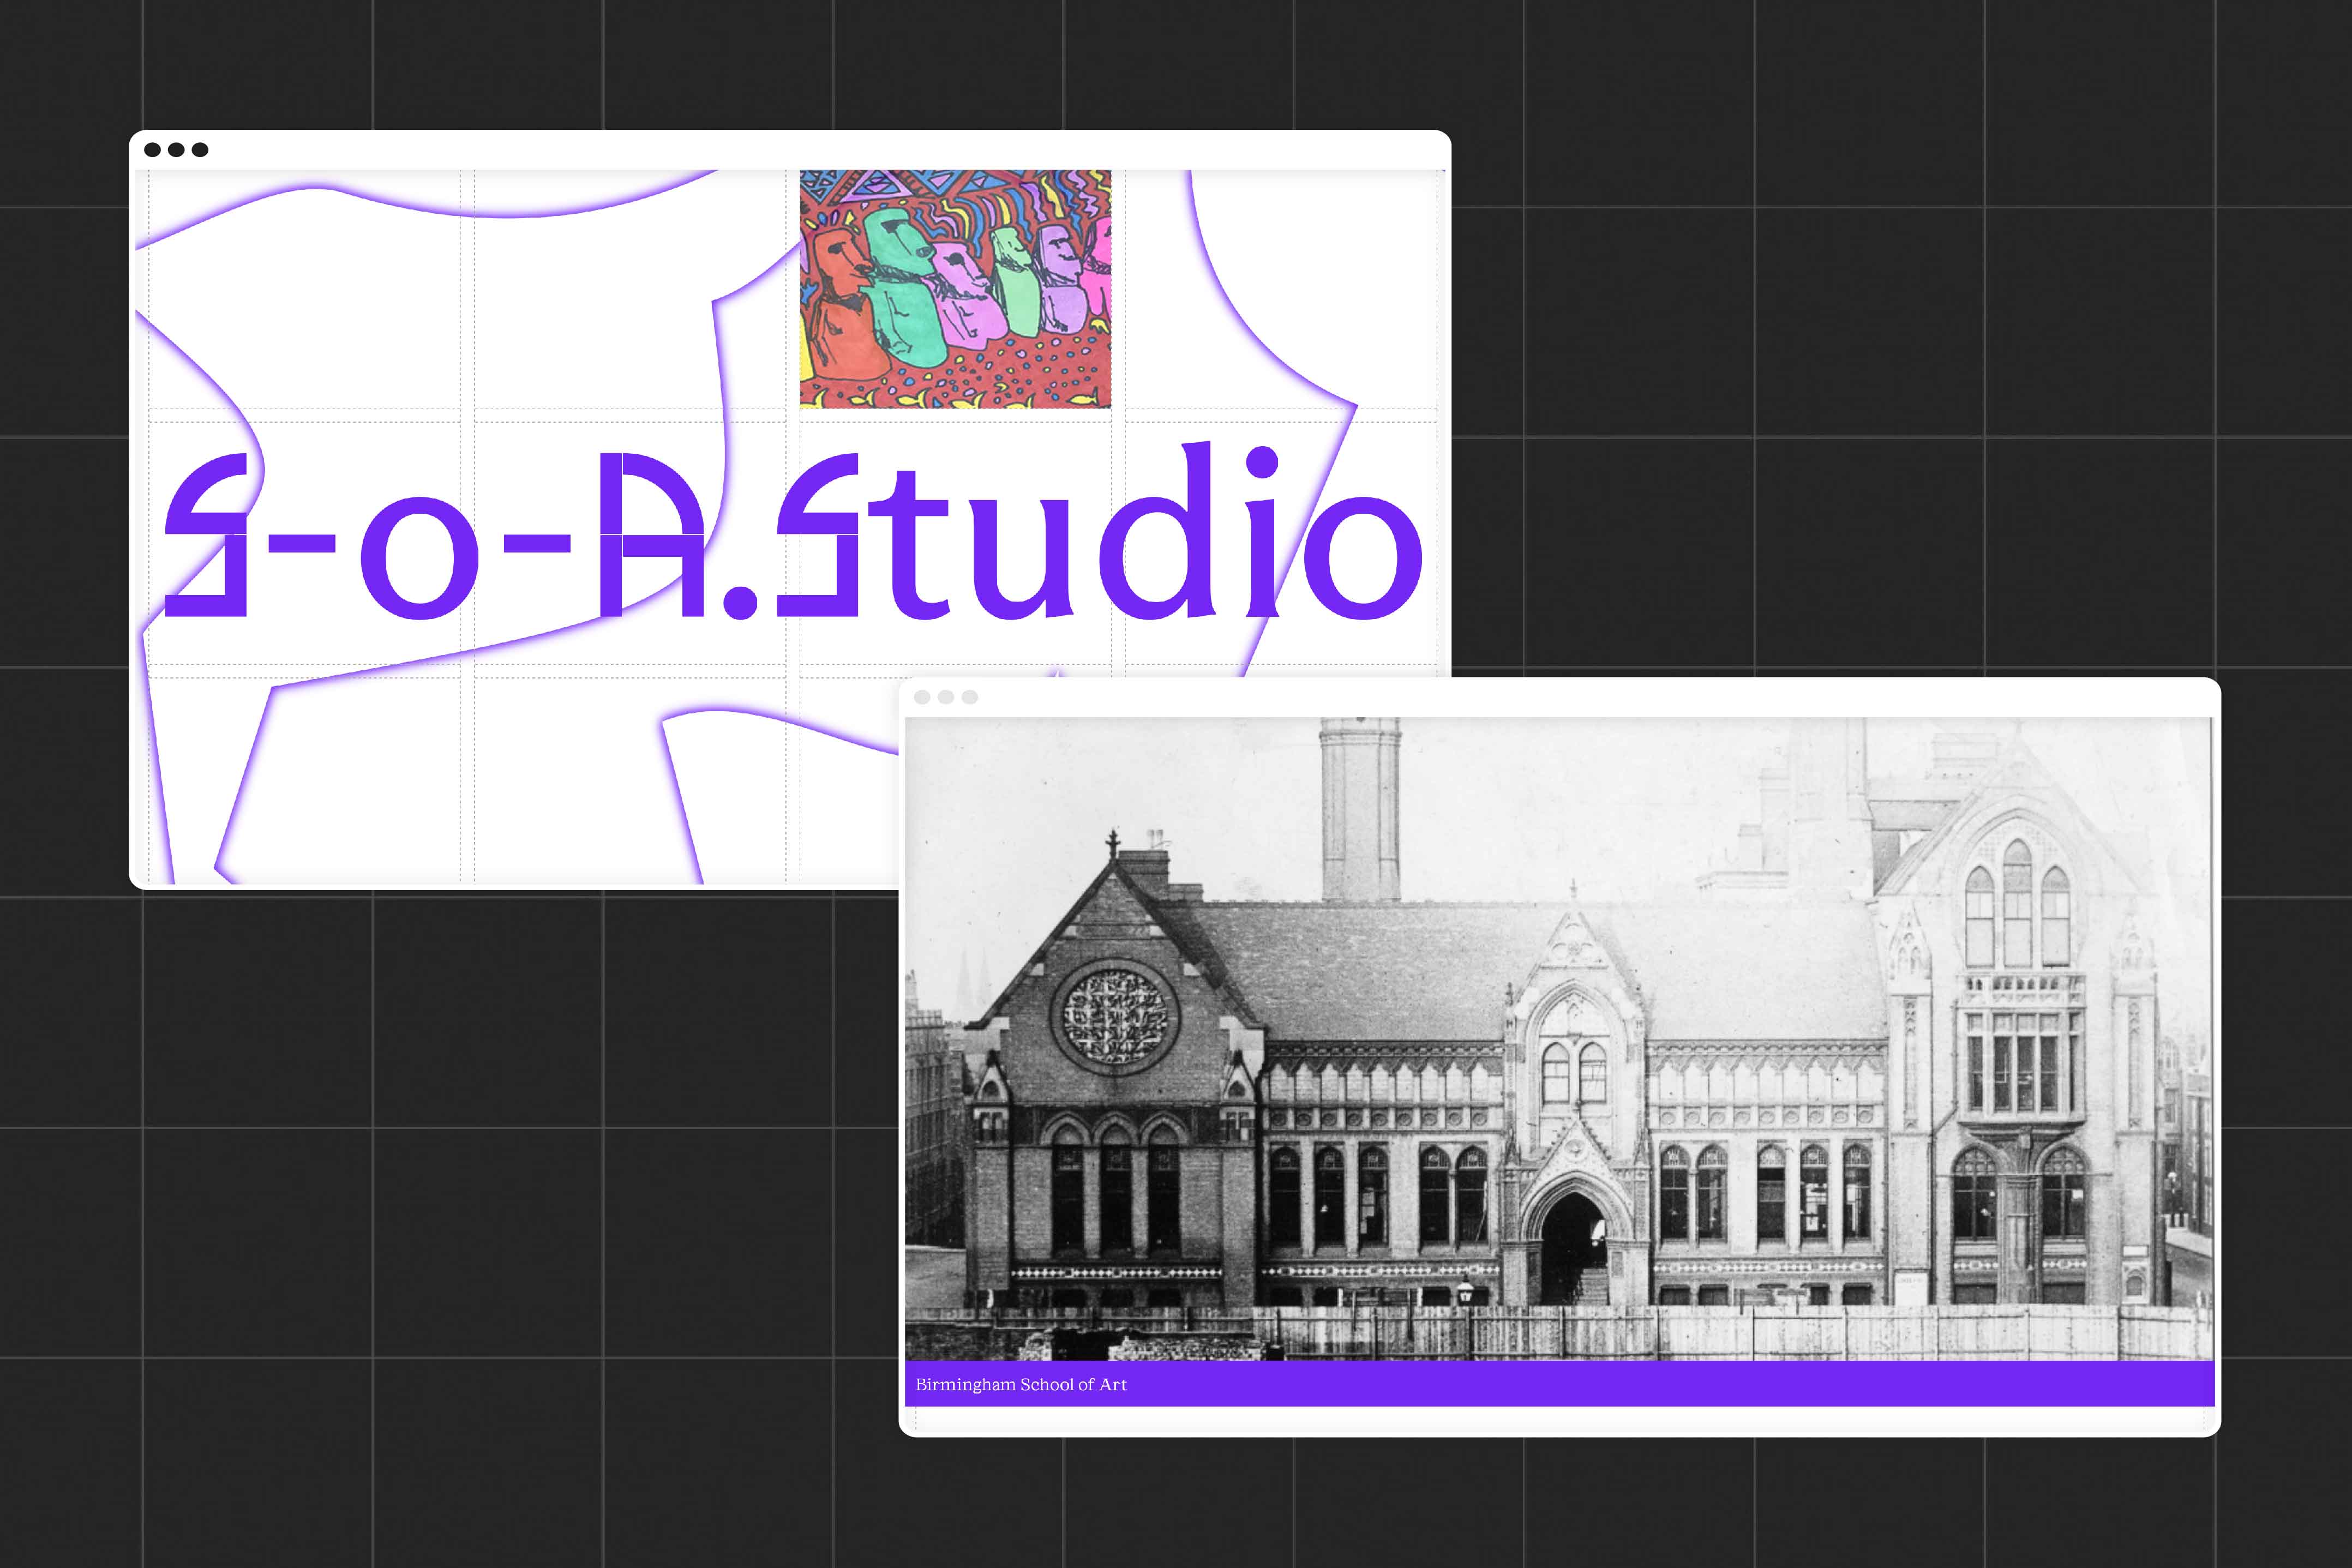 S-o-a studio splash page showing a loaded image and branding, a second image is from the about page showing an old image of Birmingham school of art